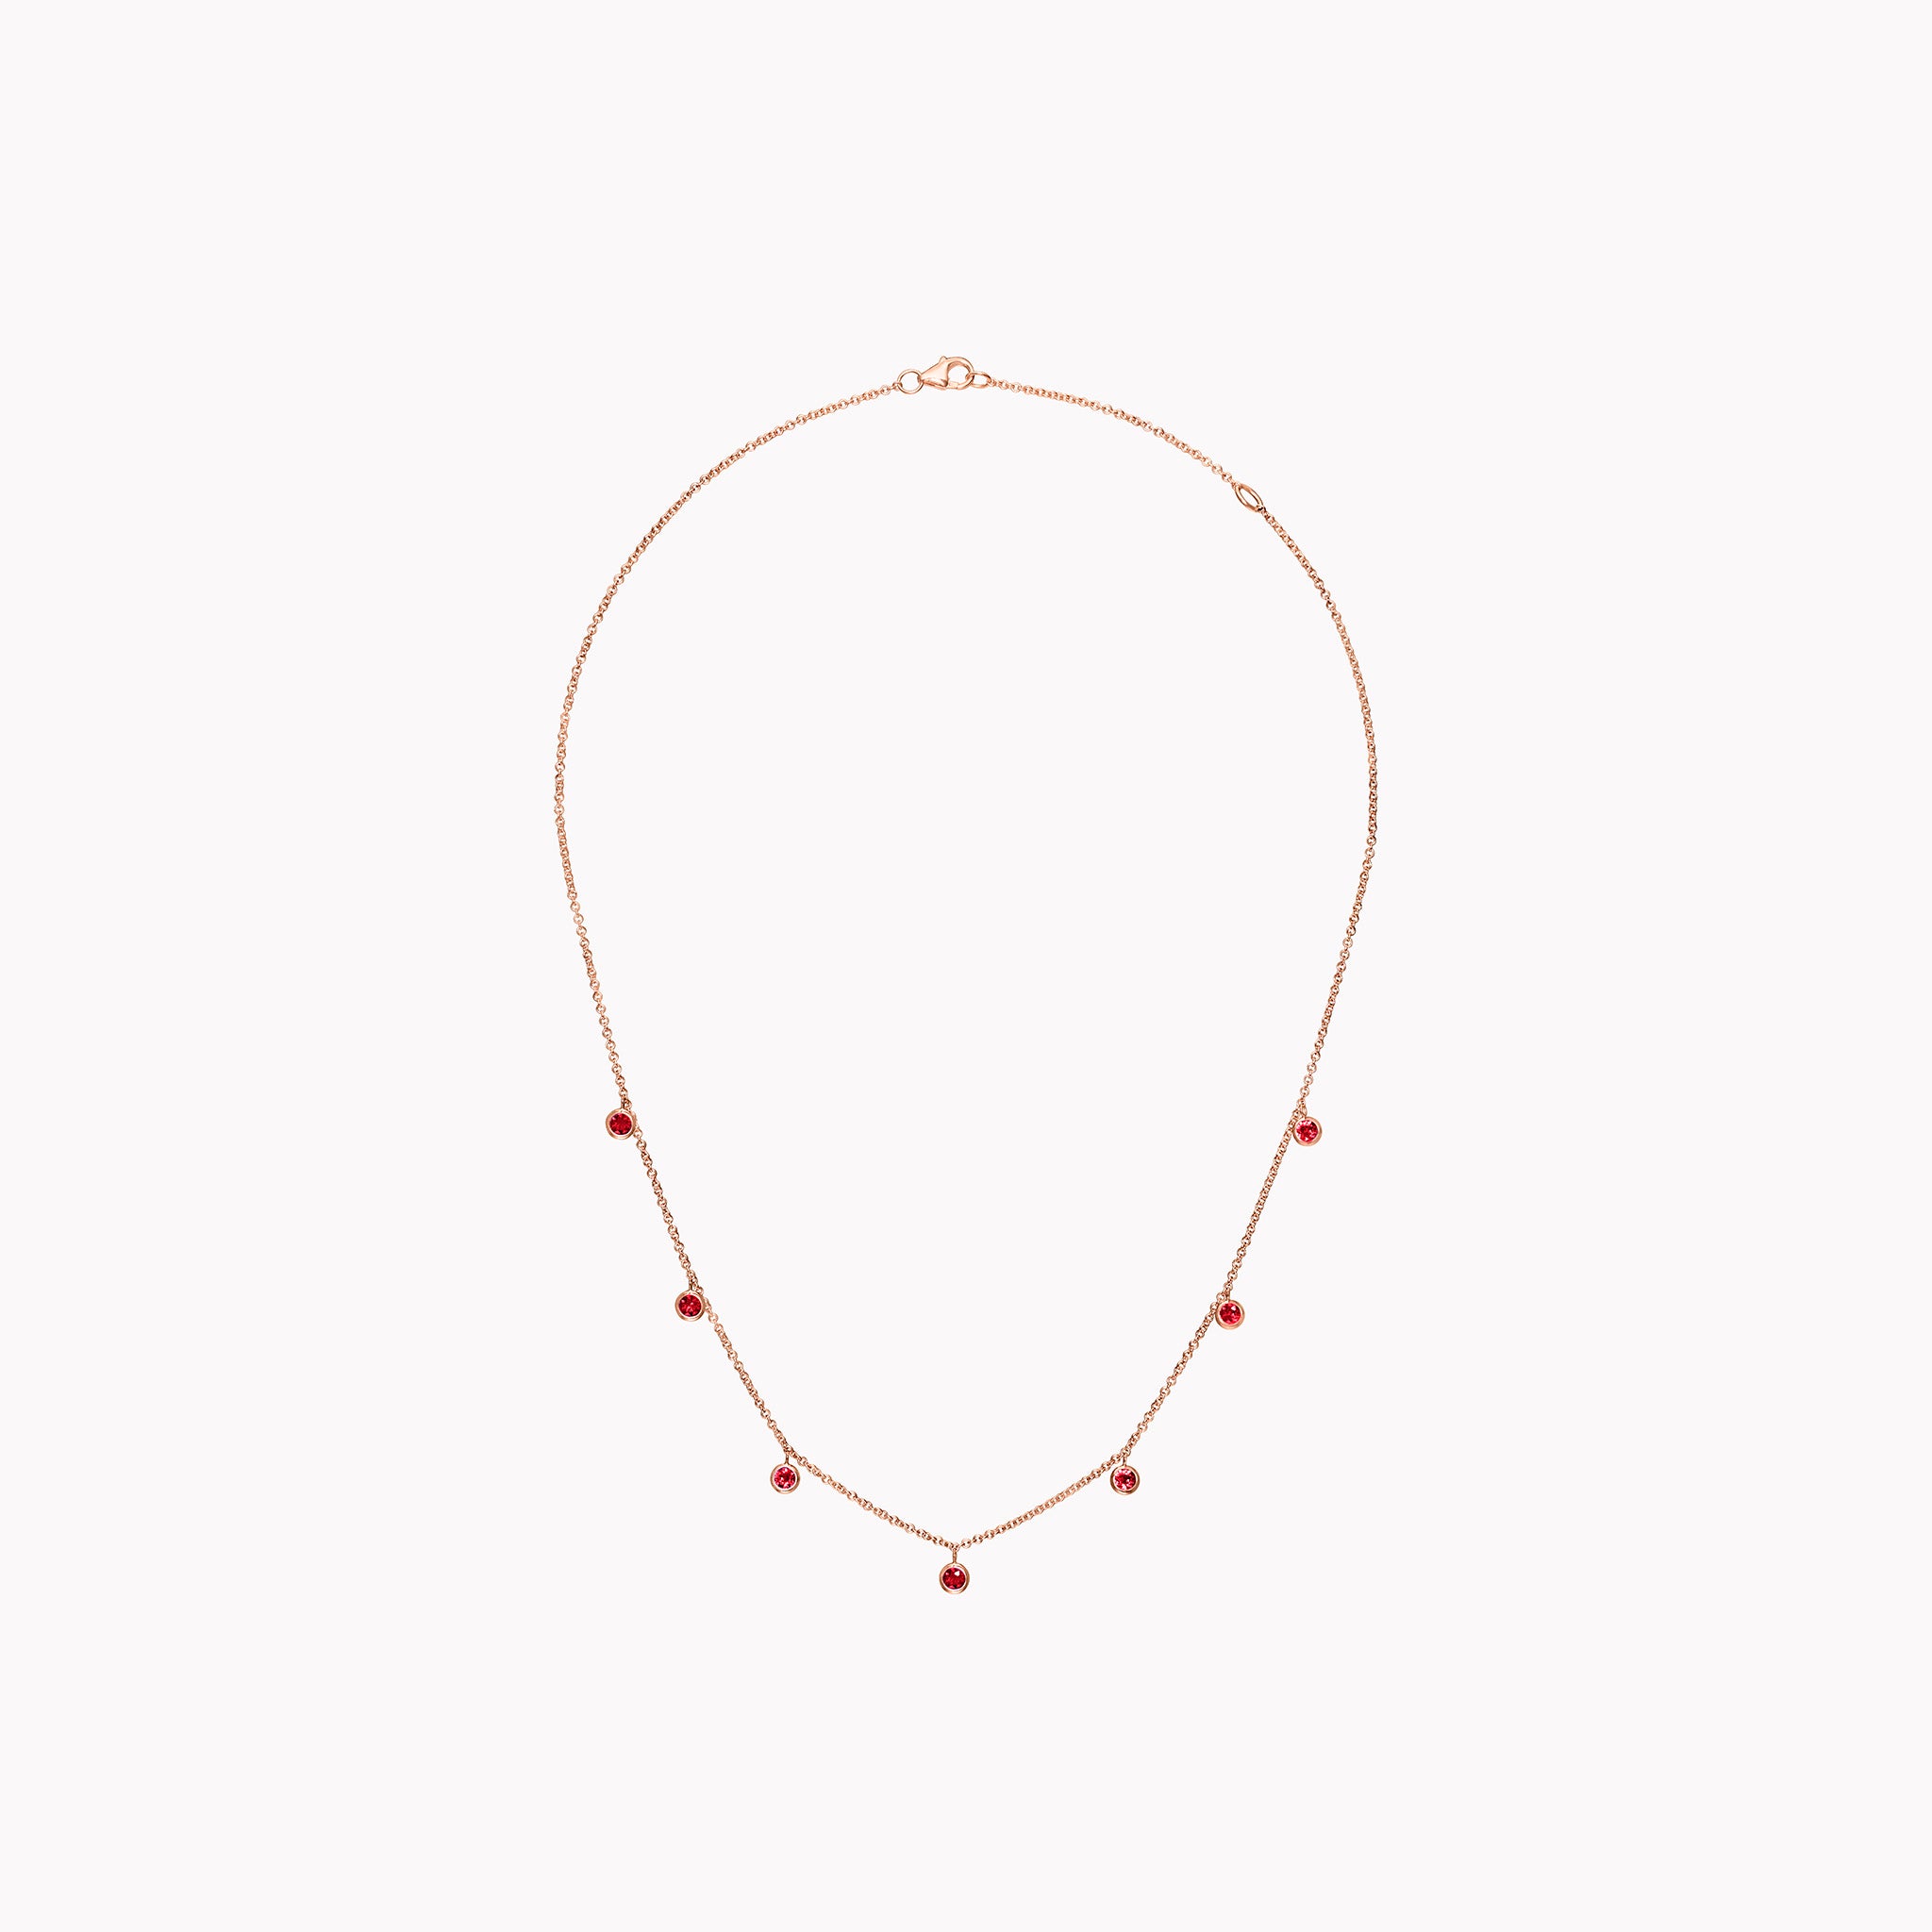 The Mia Ruby Necklace